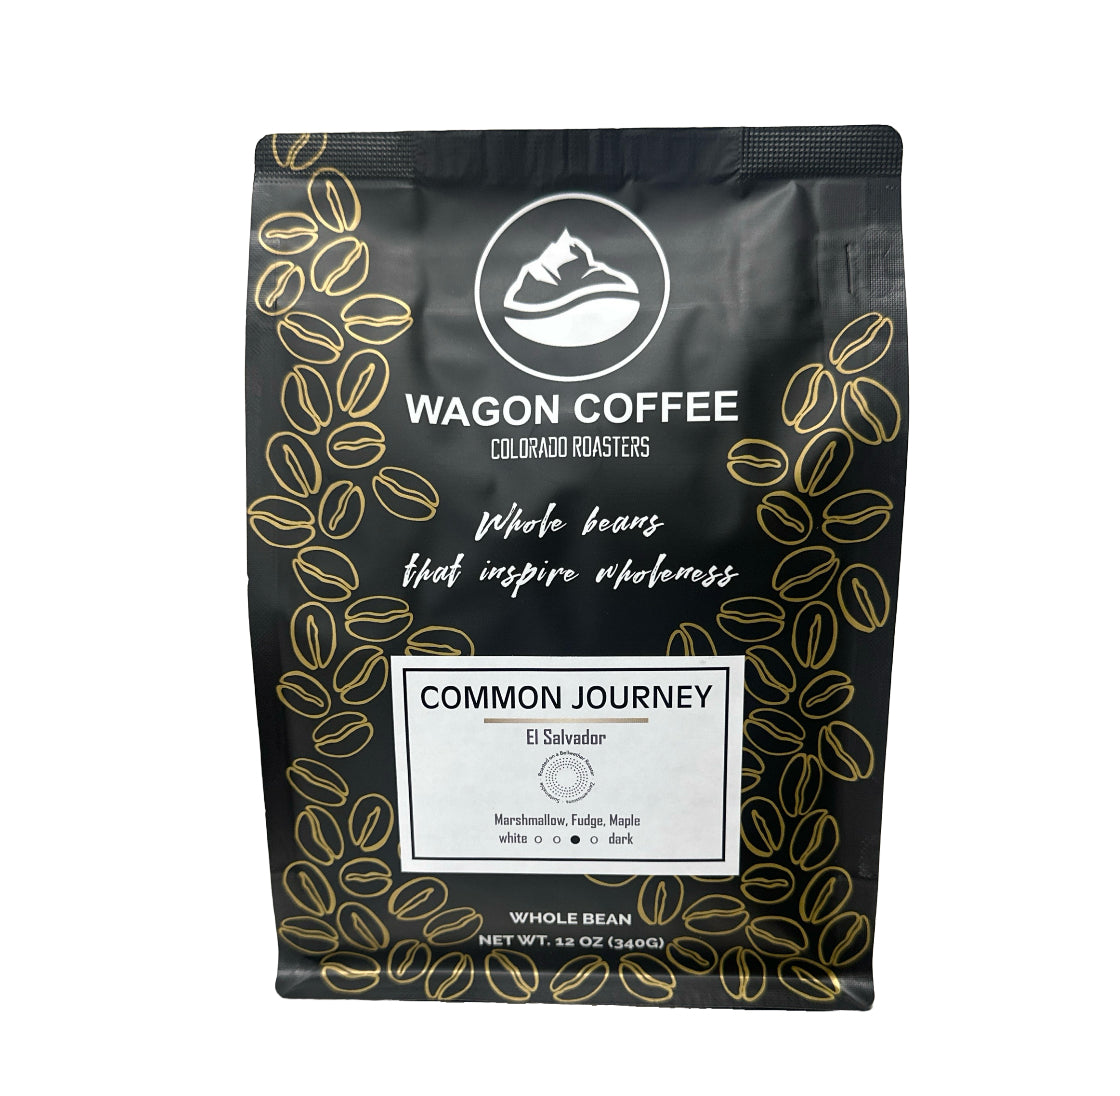 Featured Coffee of the Month